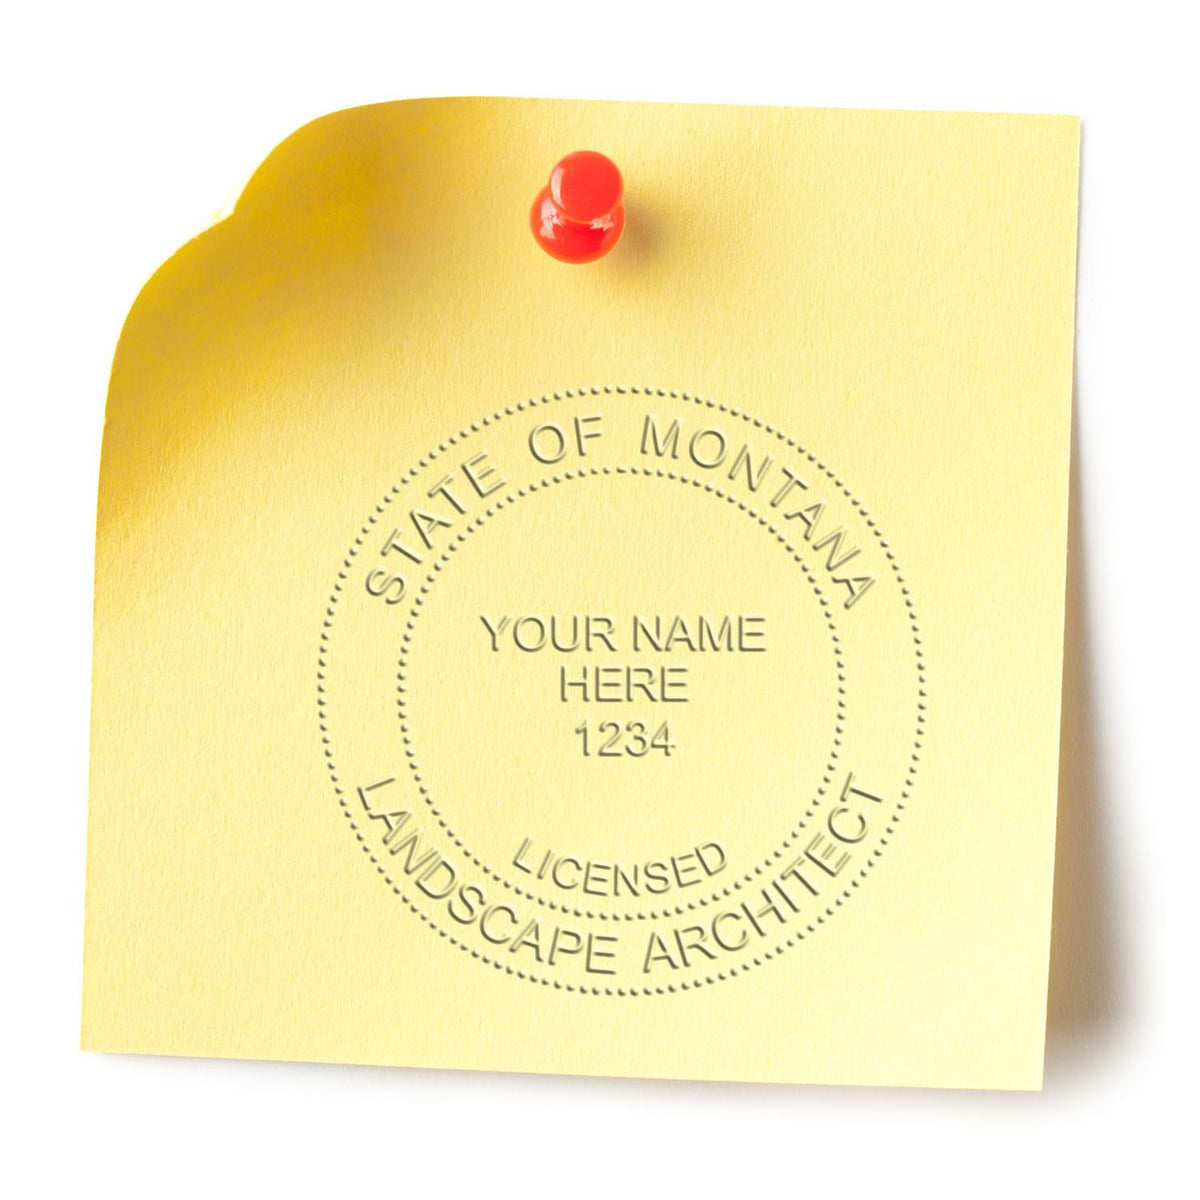 An alternative view of the Gift Montana Landscape Architect Seal stamped on a sheet of paper showing the image in use